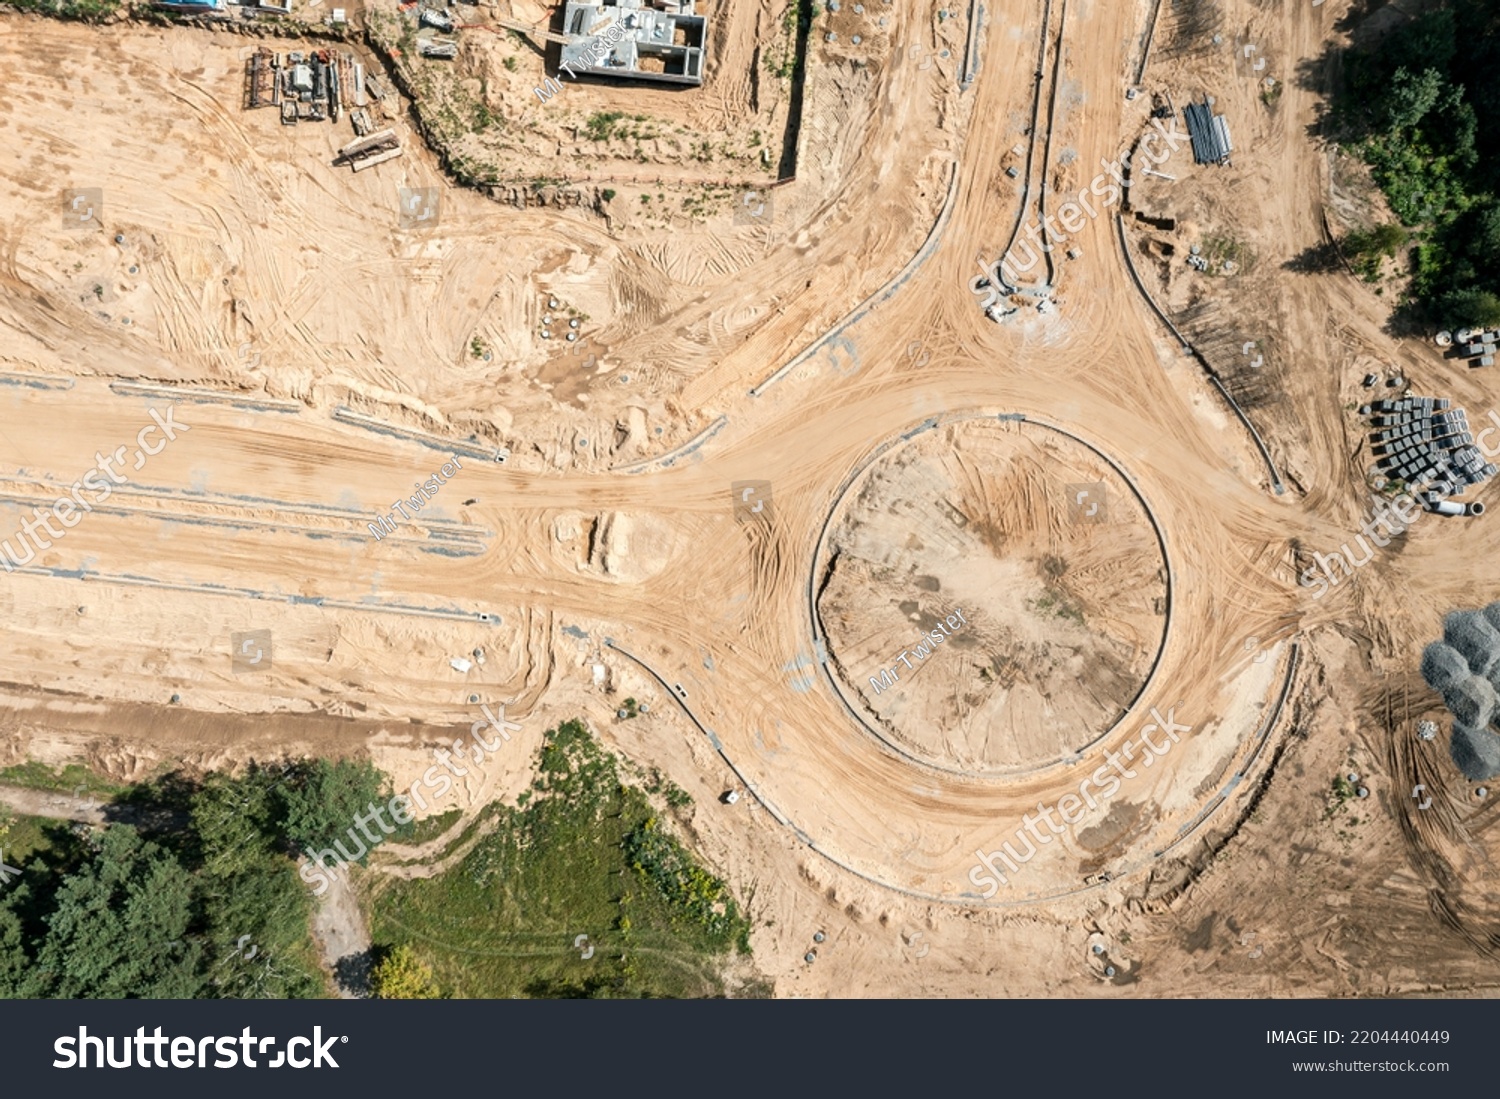 road construction. building road intersection. roundabout. aerial top view. #2204440449